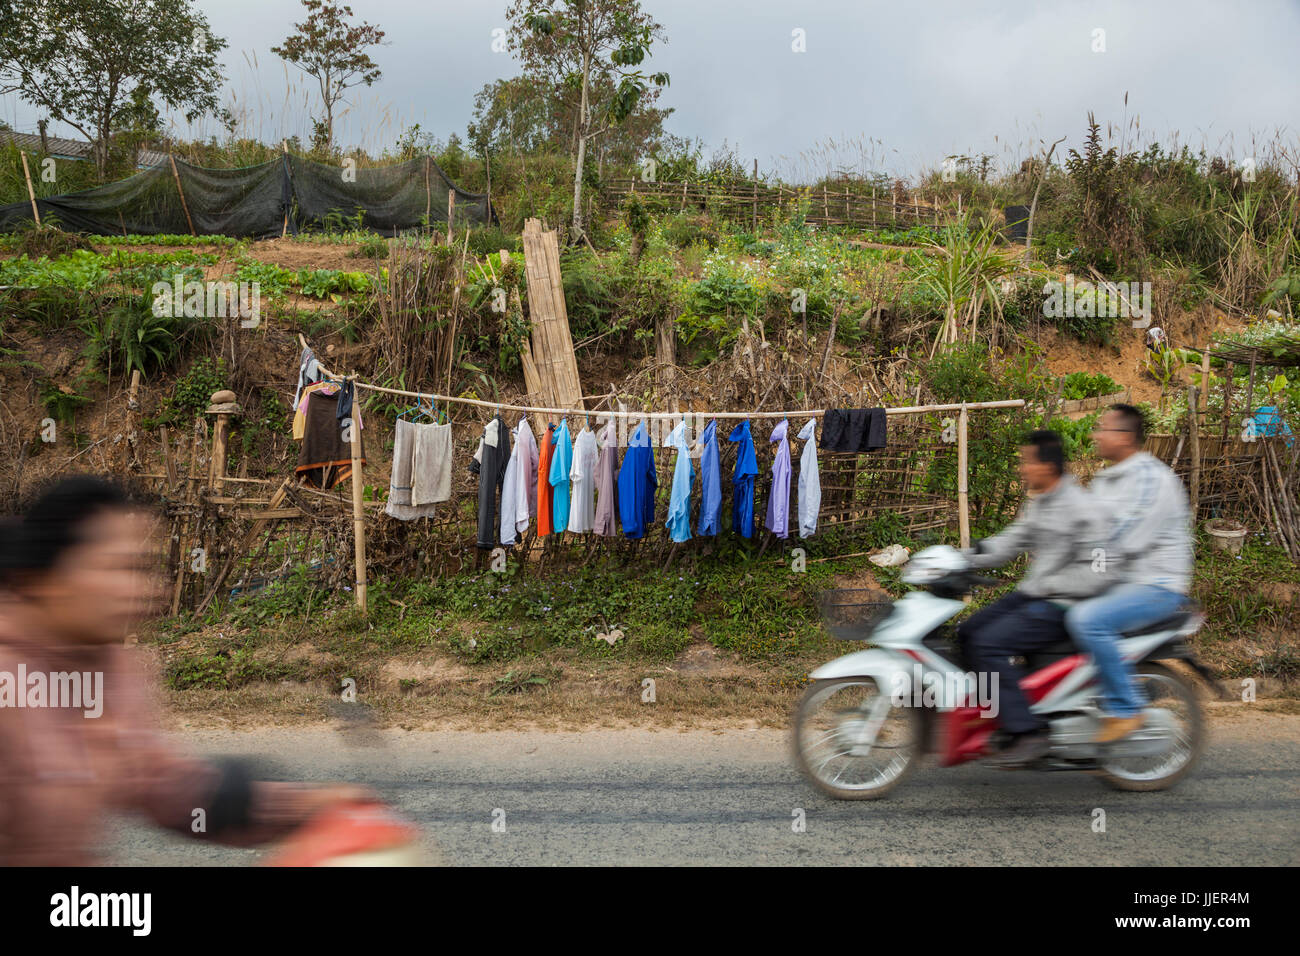 Shirts hang to dry alongside roadside gardens in Phongsaly, Laos as scooters speed past. Stock Photo